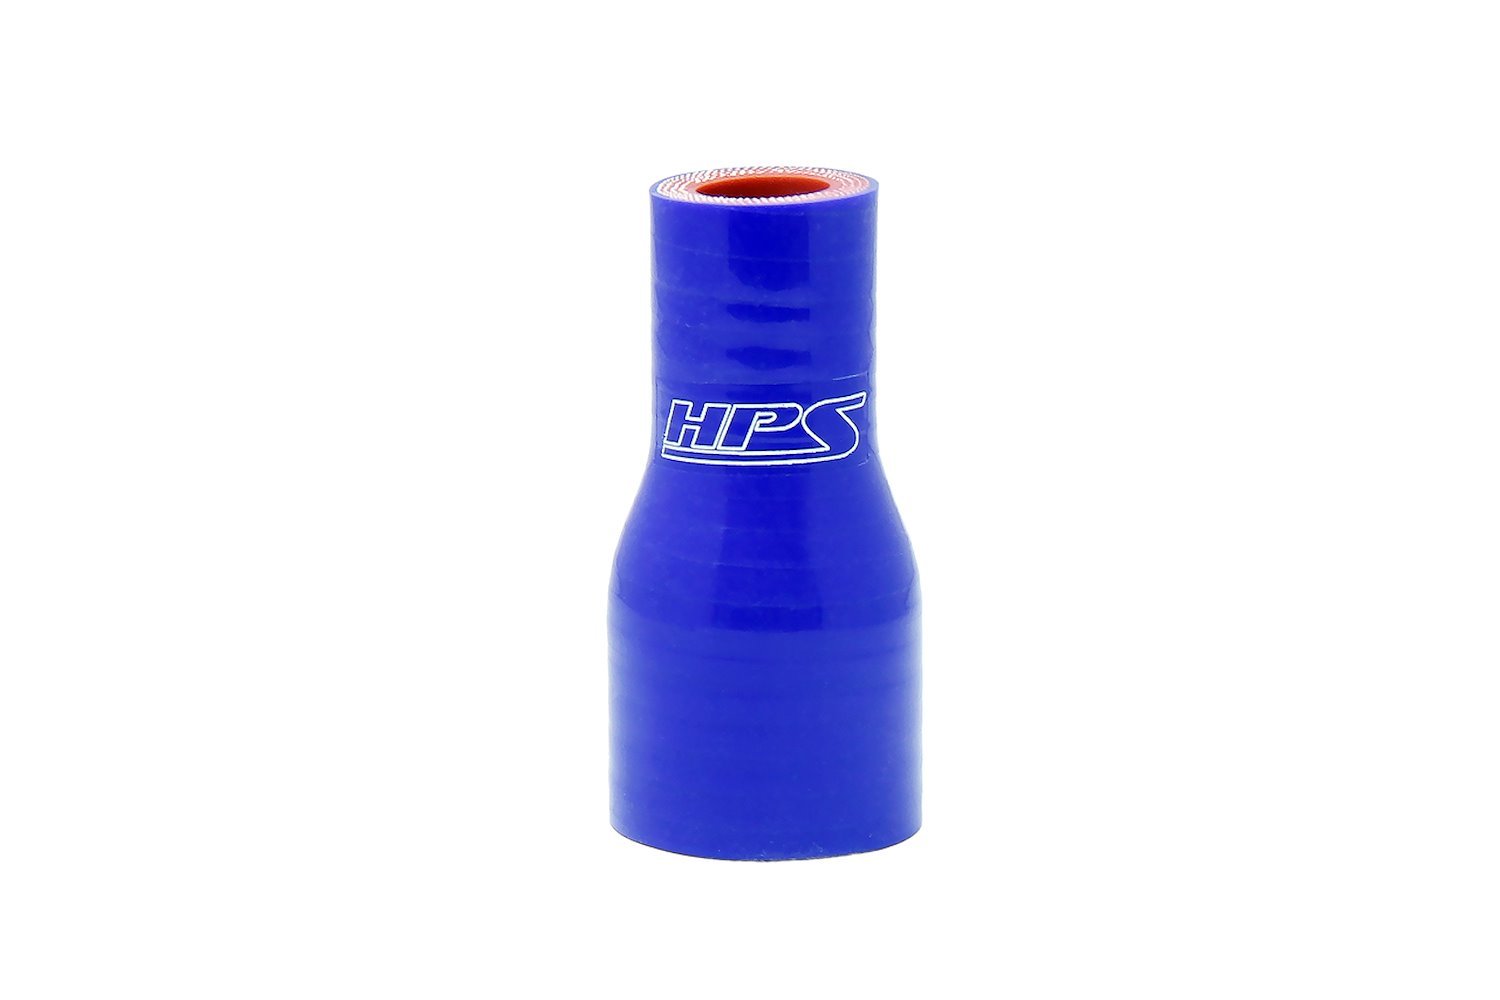 HTSR-125-162-BLUE Silicone Reducer Hose, High-Temp 4-Ply Reinforced, 1-1/4 in. - 1-5/8 in. ID, 3 in. Long, Blue